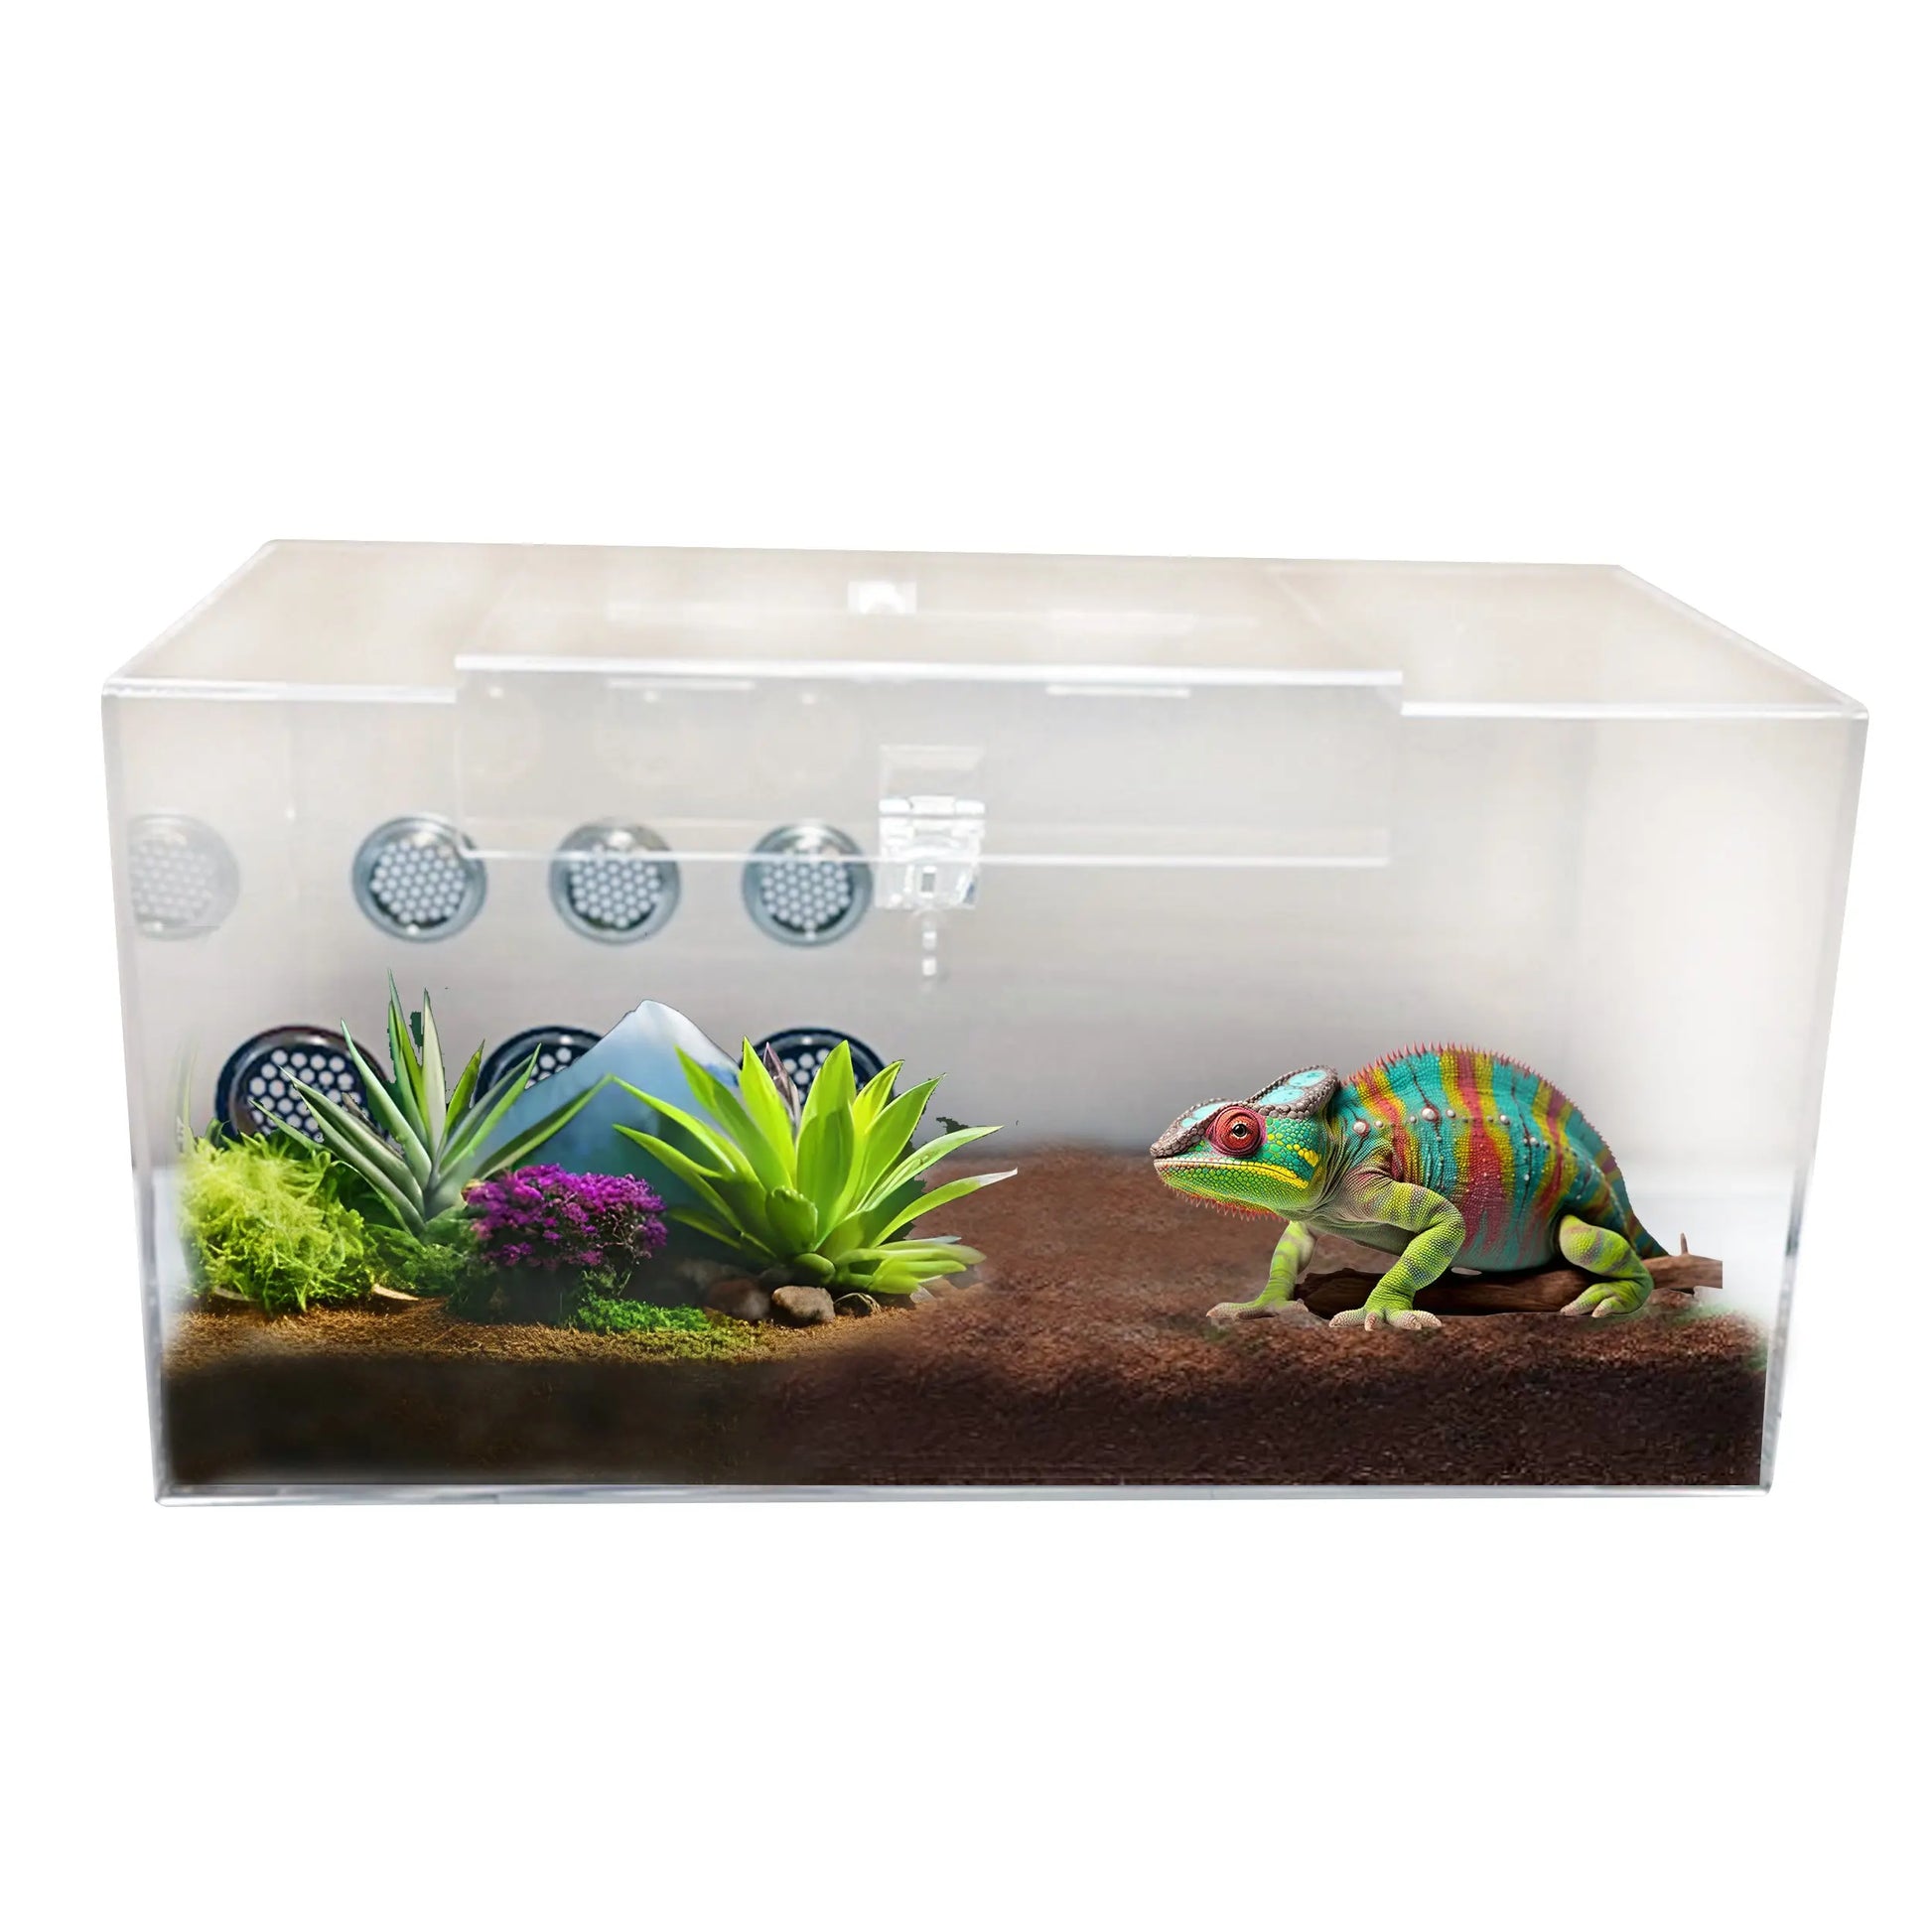 Talis-us Acrylic Tarantula Enclosure Transparent Terrariums Horizontal or Vertical Style for Spider Reptile Insect 8” x 8” x 16” Talis Us